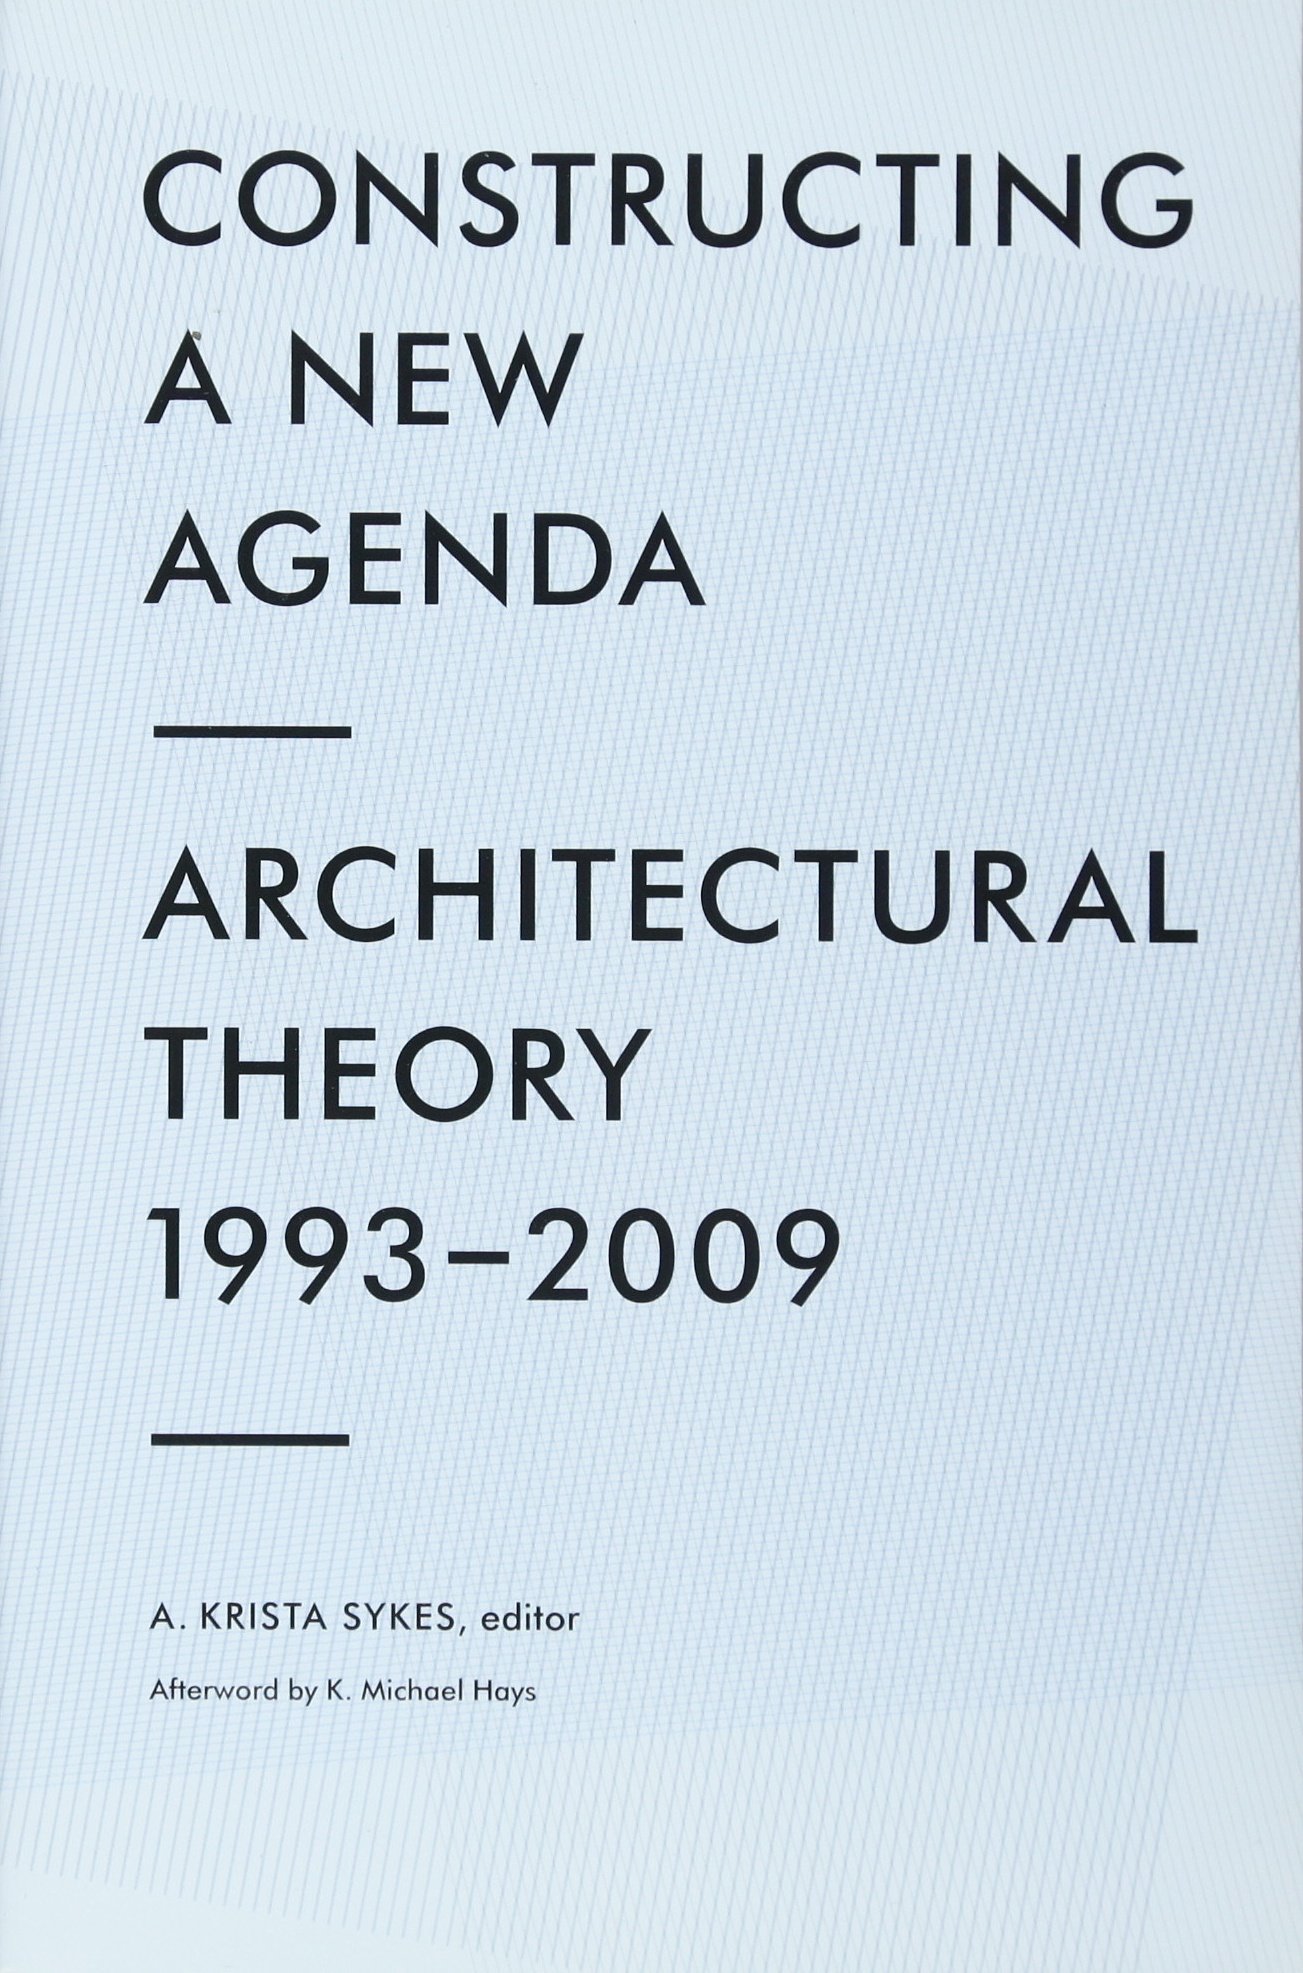 Constructing a New Agenda—Architecture Theory 1993-2009